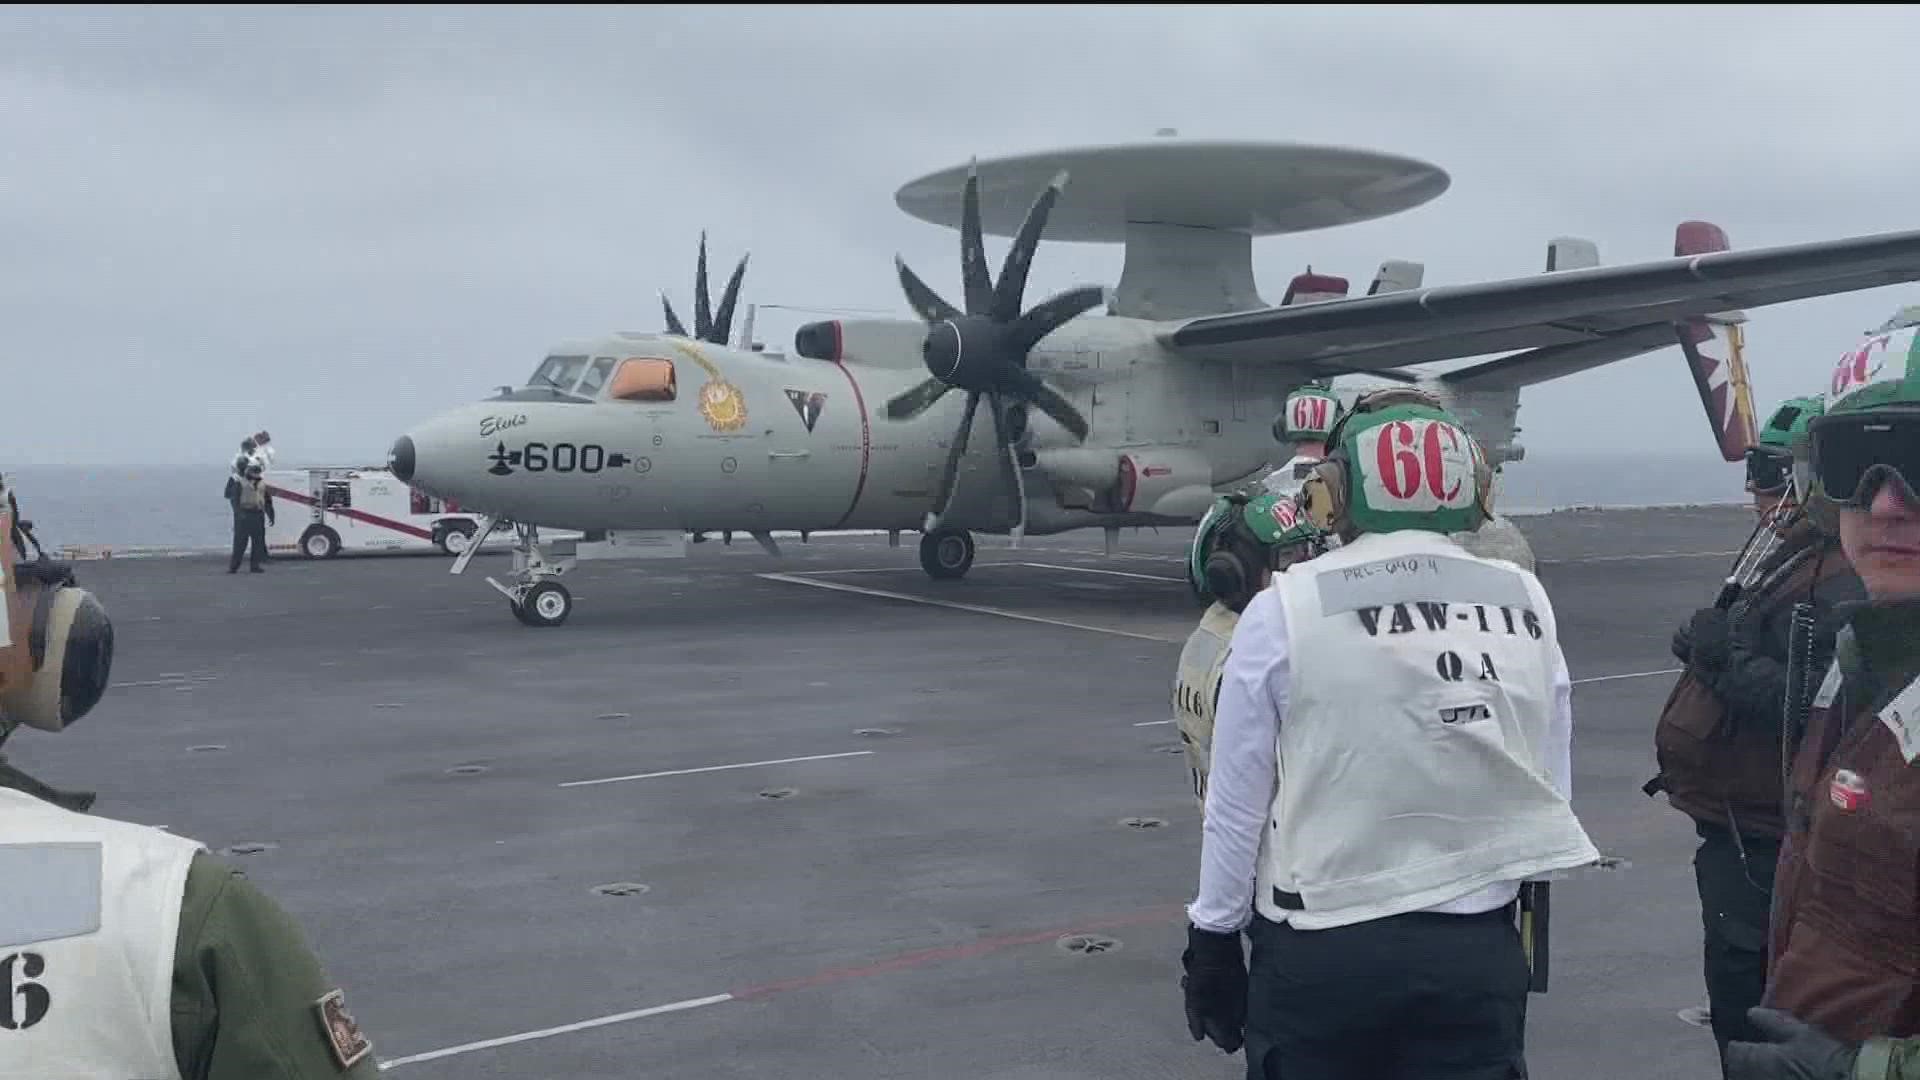 CBS 8 was given a chance to board the aircraft carrier for two days while at sea to get an inside look at life aboard the ship.